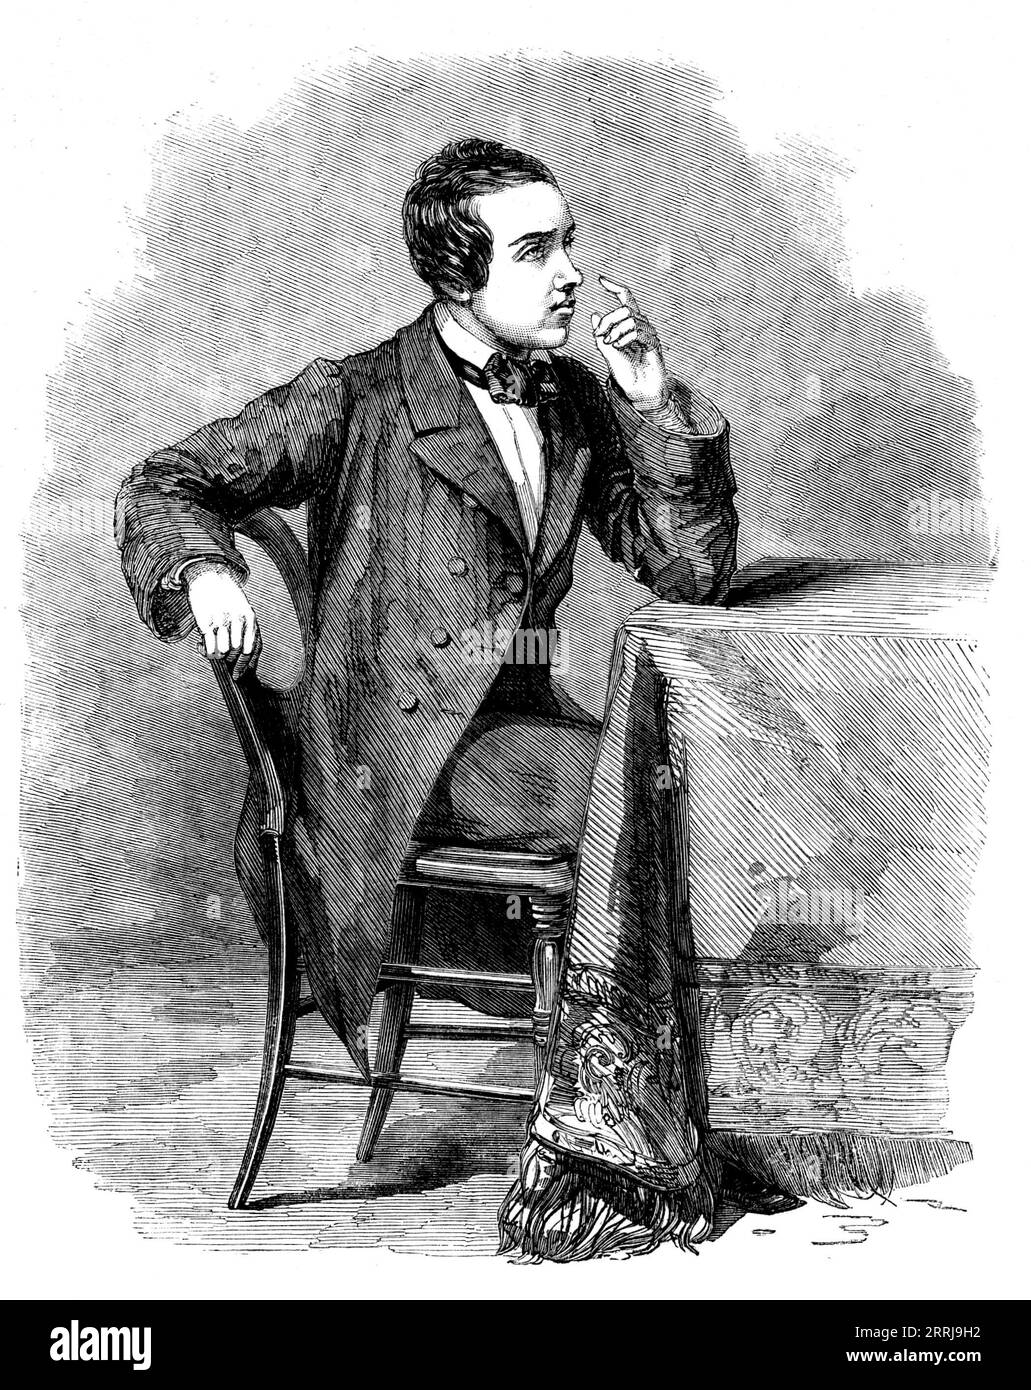 Mr. Morphy, the Celebrated Chessplayer, 1858. '...this remarkable young chessplayer...[has performed an] astounding feat at Birmingham in conducting eight games blindfold at the same time against eight strong opponents...Paul Morphy, the winner of the first prize in the late Chess Congress, not content with the triumphs of the New World, has visited England, and added widely to his fame by the conquest of the two best players with whom he has yet contended...The Engraving represents our young hero as he appeared in the rooms of Queen's College, Birmingham...when, before a numerous assemblage, Stock Photo